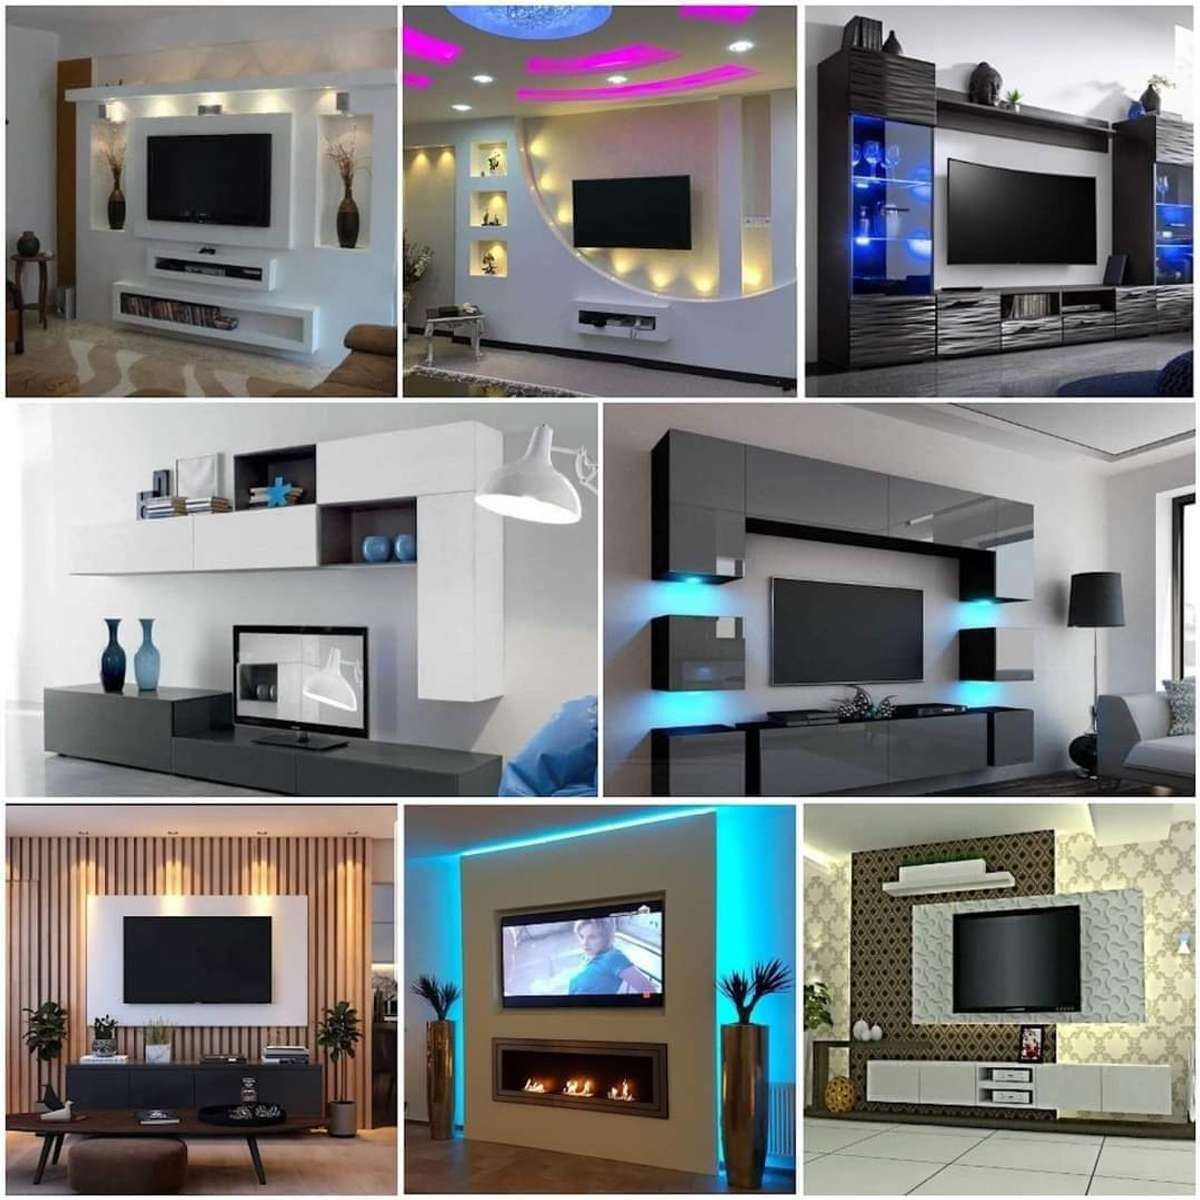 Entertainment units you'll want in your home ASAP! <3

For All types of Construction & Interior work in Delhi-NCR contact us Directly @ 9310008283.


#Homedecore #new_home #homestyle #delhincr #ncr #delhiinteriors #noidaintreor  #HouseConstruction #DelhiGhaziabadNoida  #HouseDesigns #villaproject 
all type  #construction work ,  #ARCHITECTURE  #INTERIOR DESIGN, TOWN PLANNING, URBAN DESIGN LANDSCAPE DESIGN, HVAC, #QUANTITY #SURVEYING #PLUMBING PROJECT MANAGEMENT LANDSCAPING #FIRE FIGHTING ,all type civil #structure work , #painter ,#painting service #carpenters ,carpentering service plumber and plumbing service #electrician and #electrical services , #flooring  and #waterproofing services and other services ,